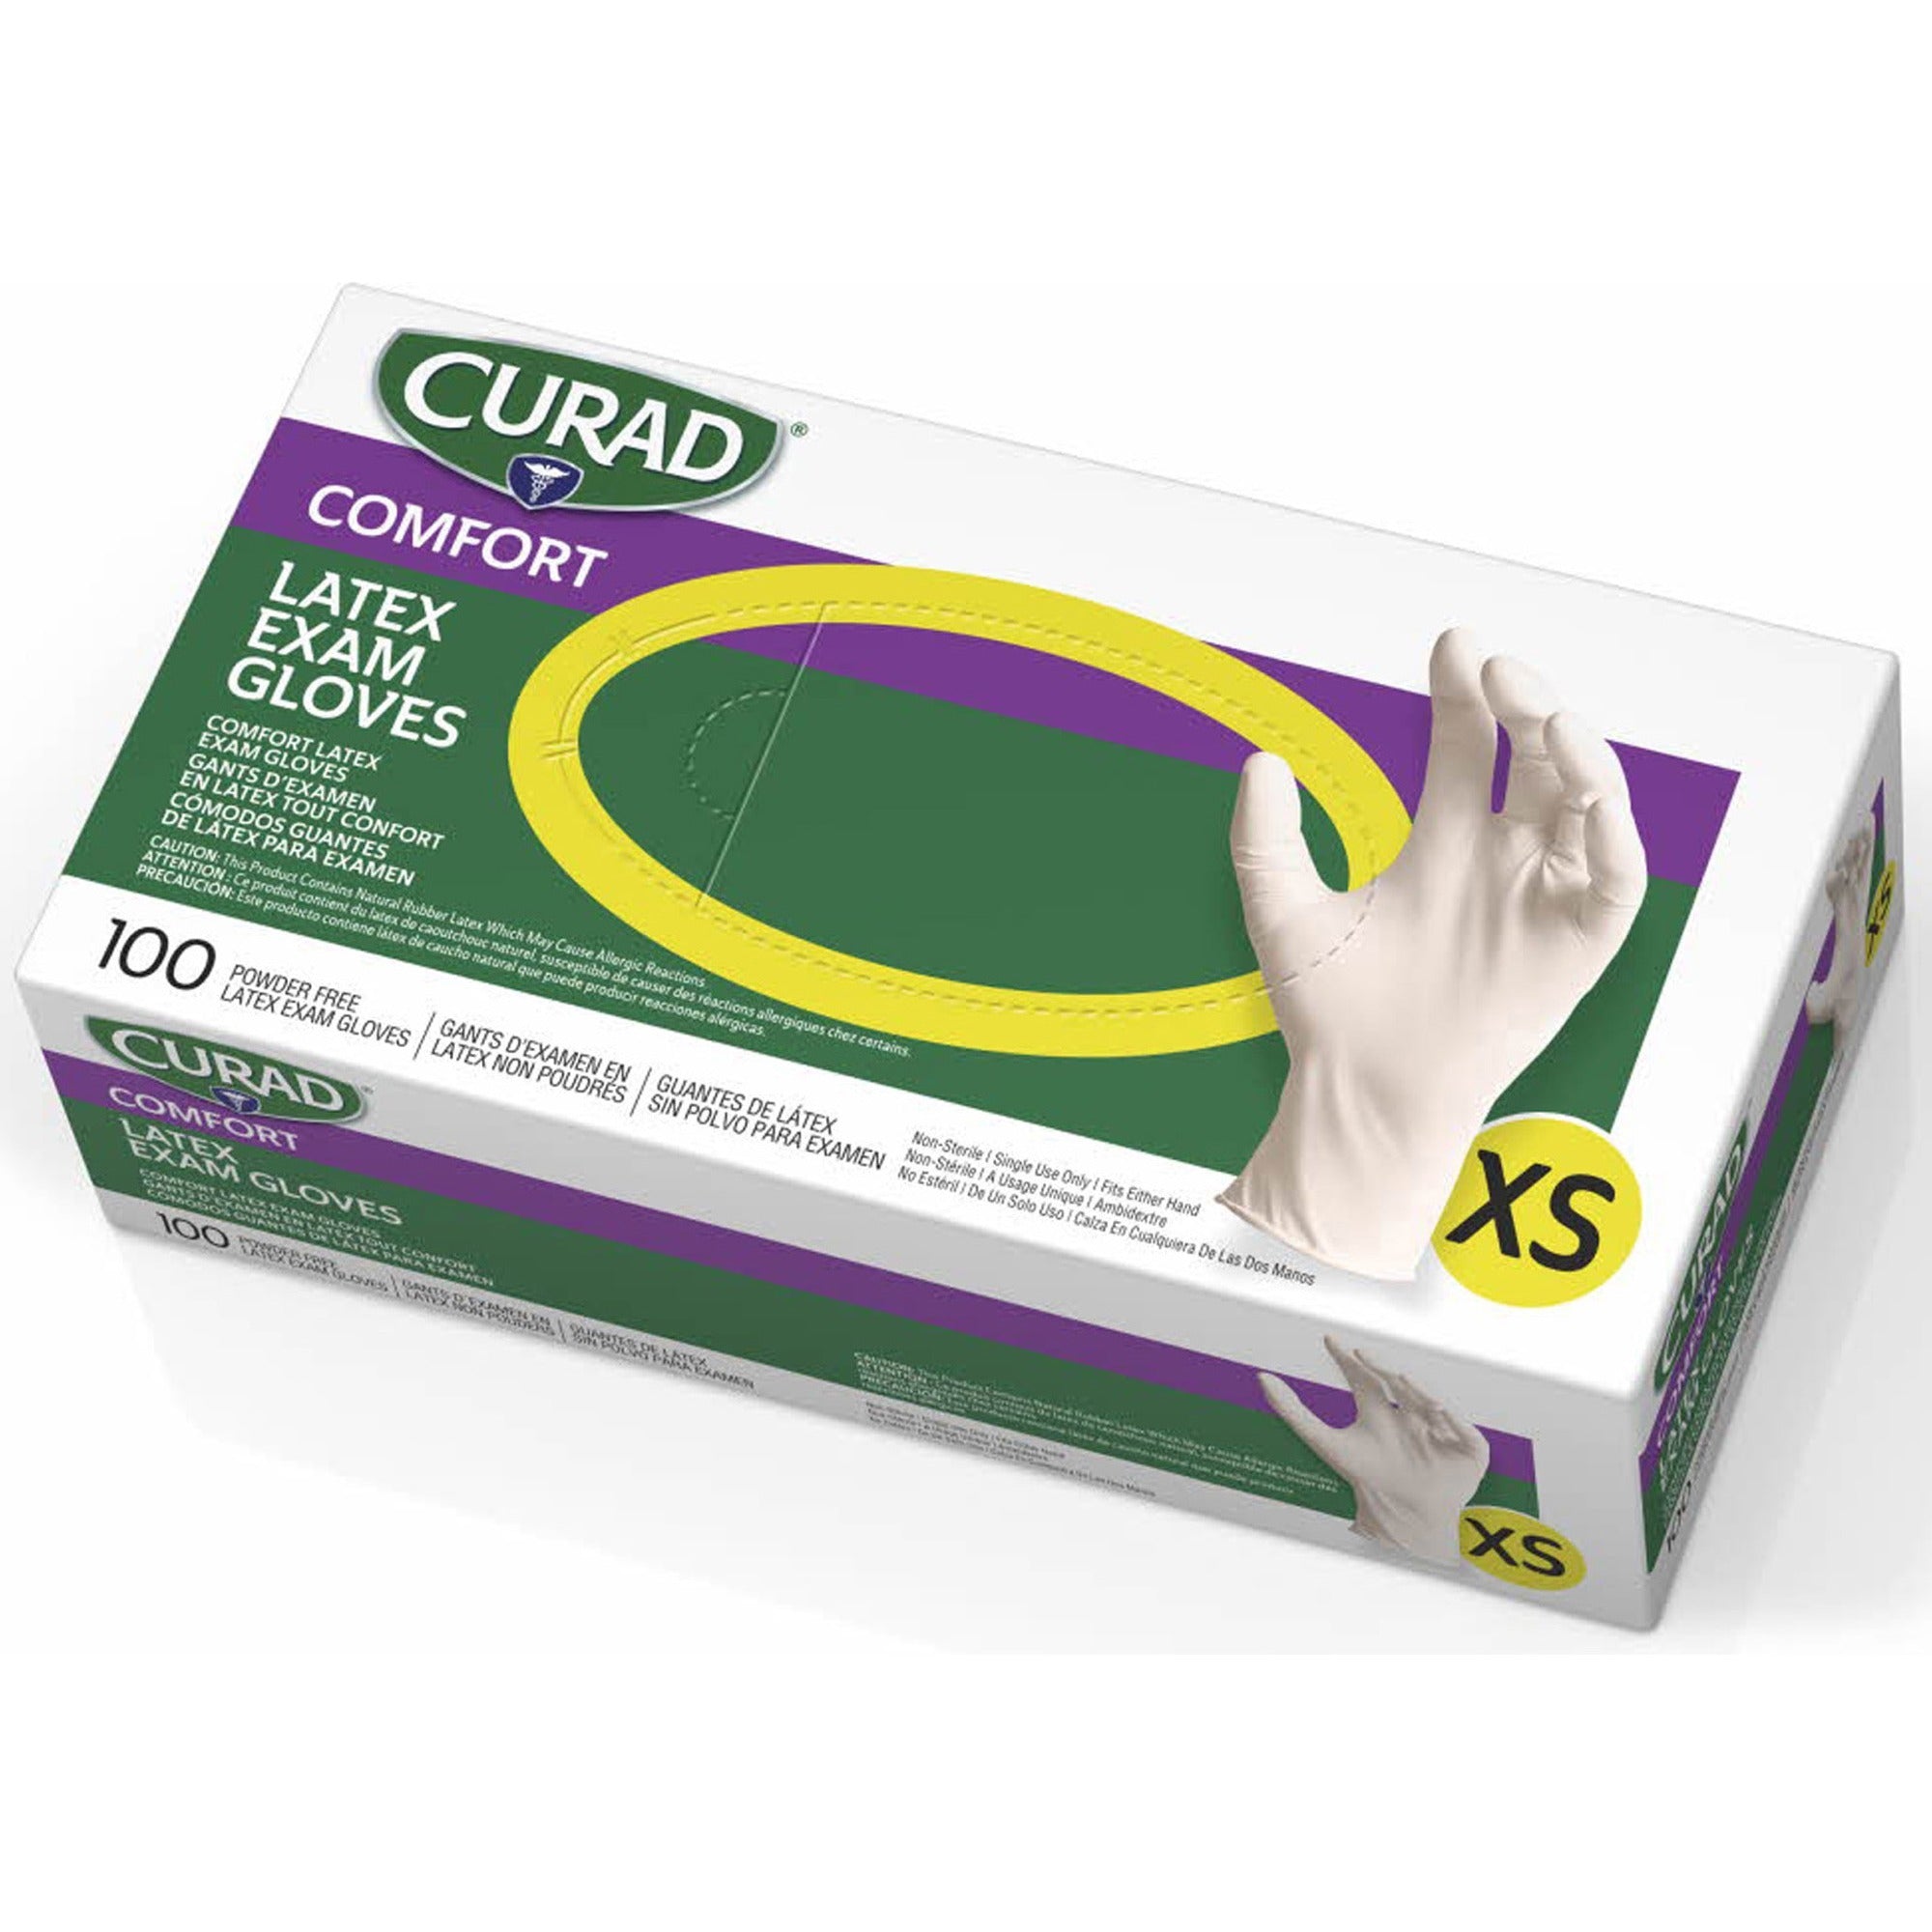 curad-powder-free-latex-exam-gloves-x-small-size-white-textured-for-healthcare-working-100-box_miicur8103 - 1